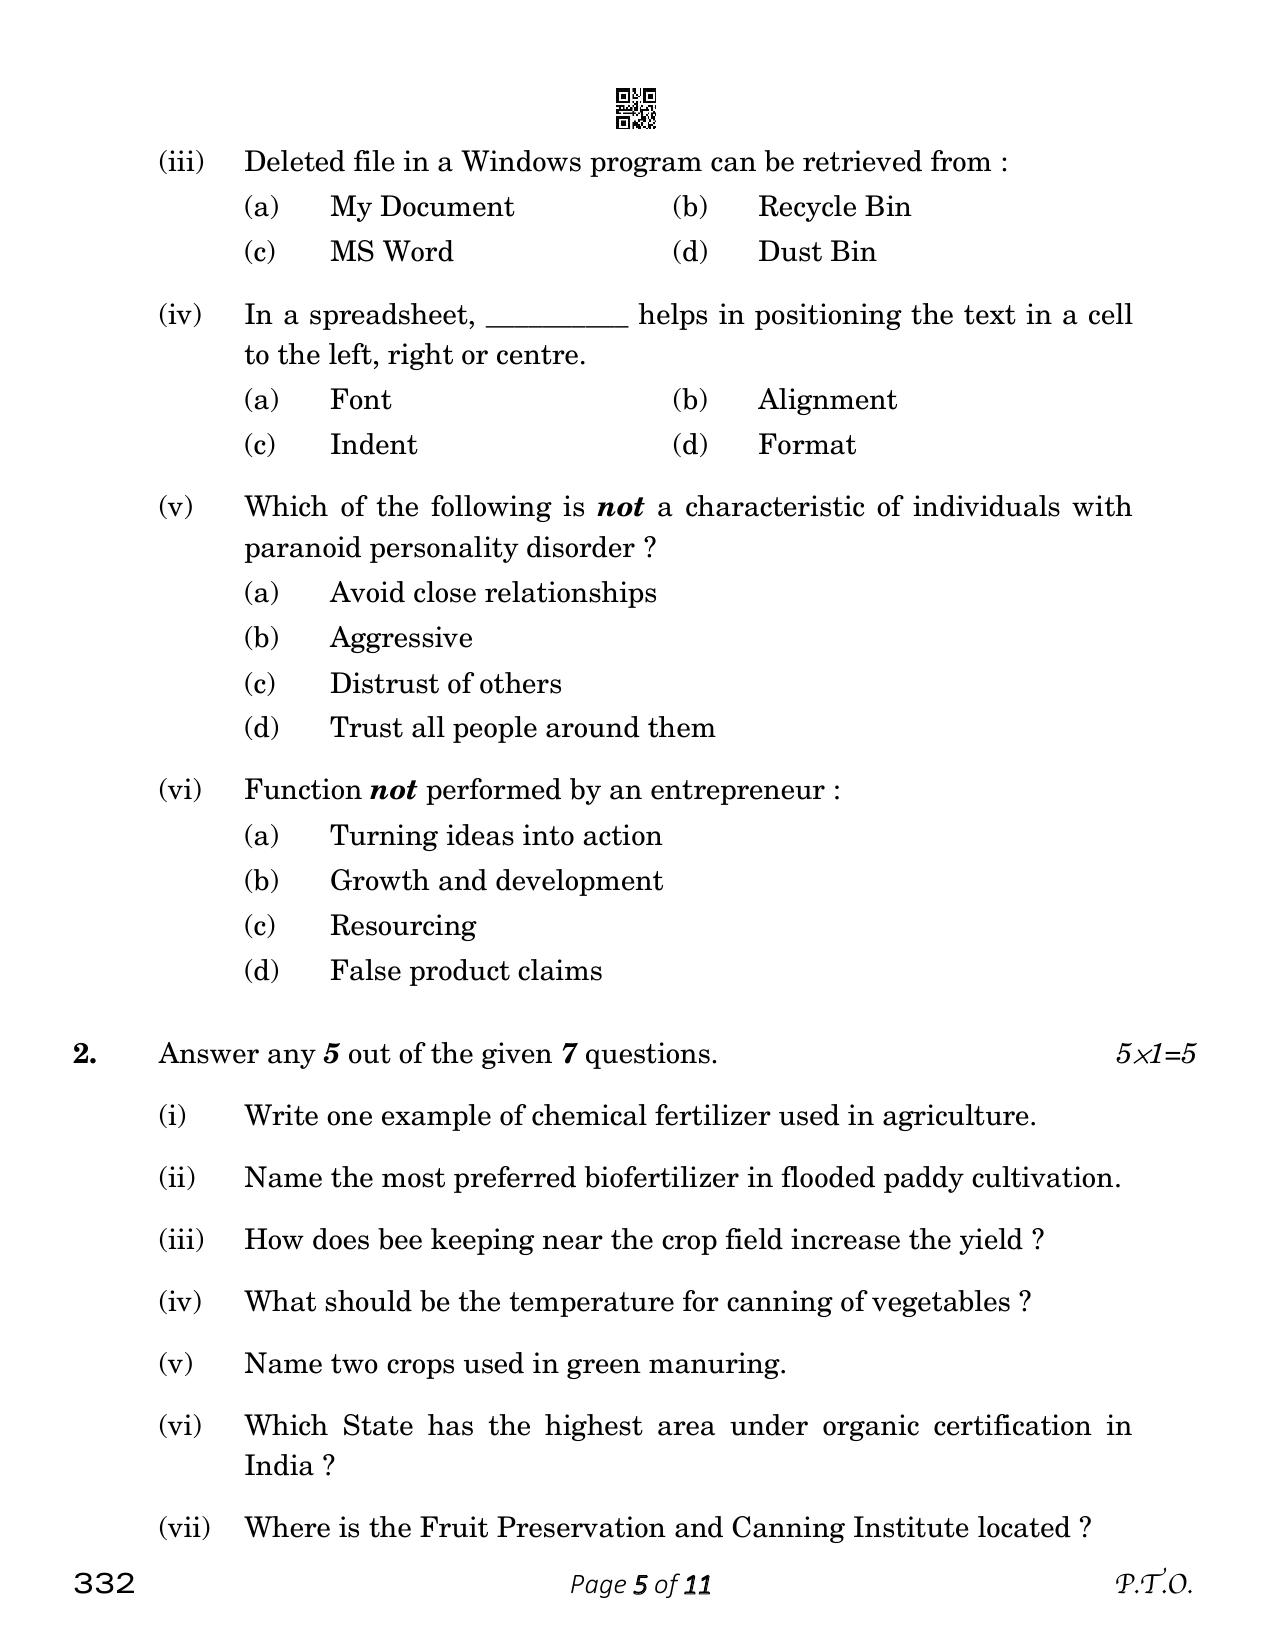 CBSE Class 12 Agriculture (Compartment) 2023 Question Paper - Page 5